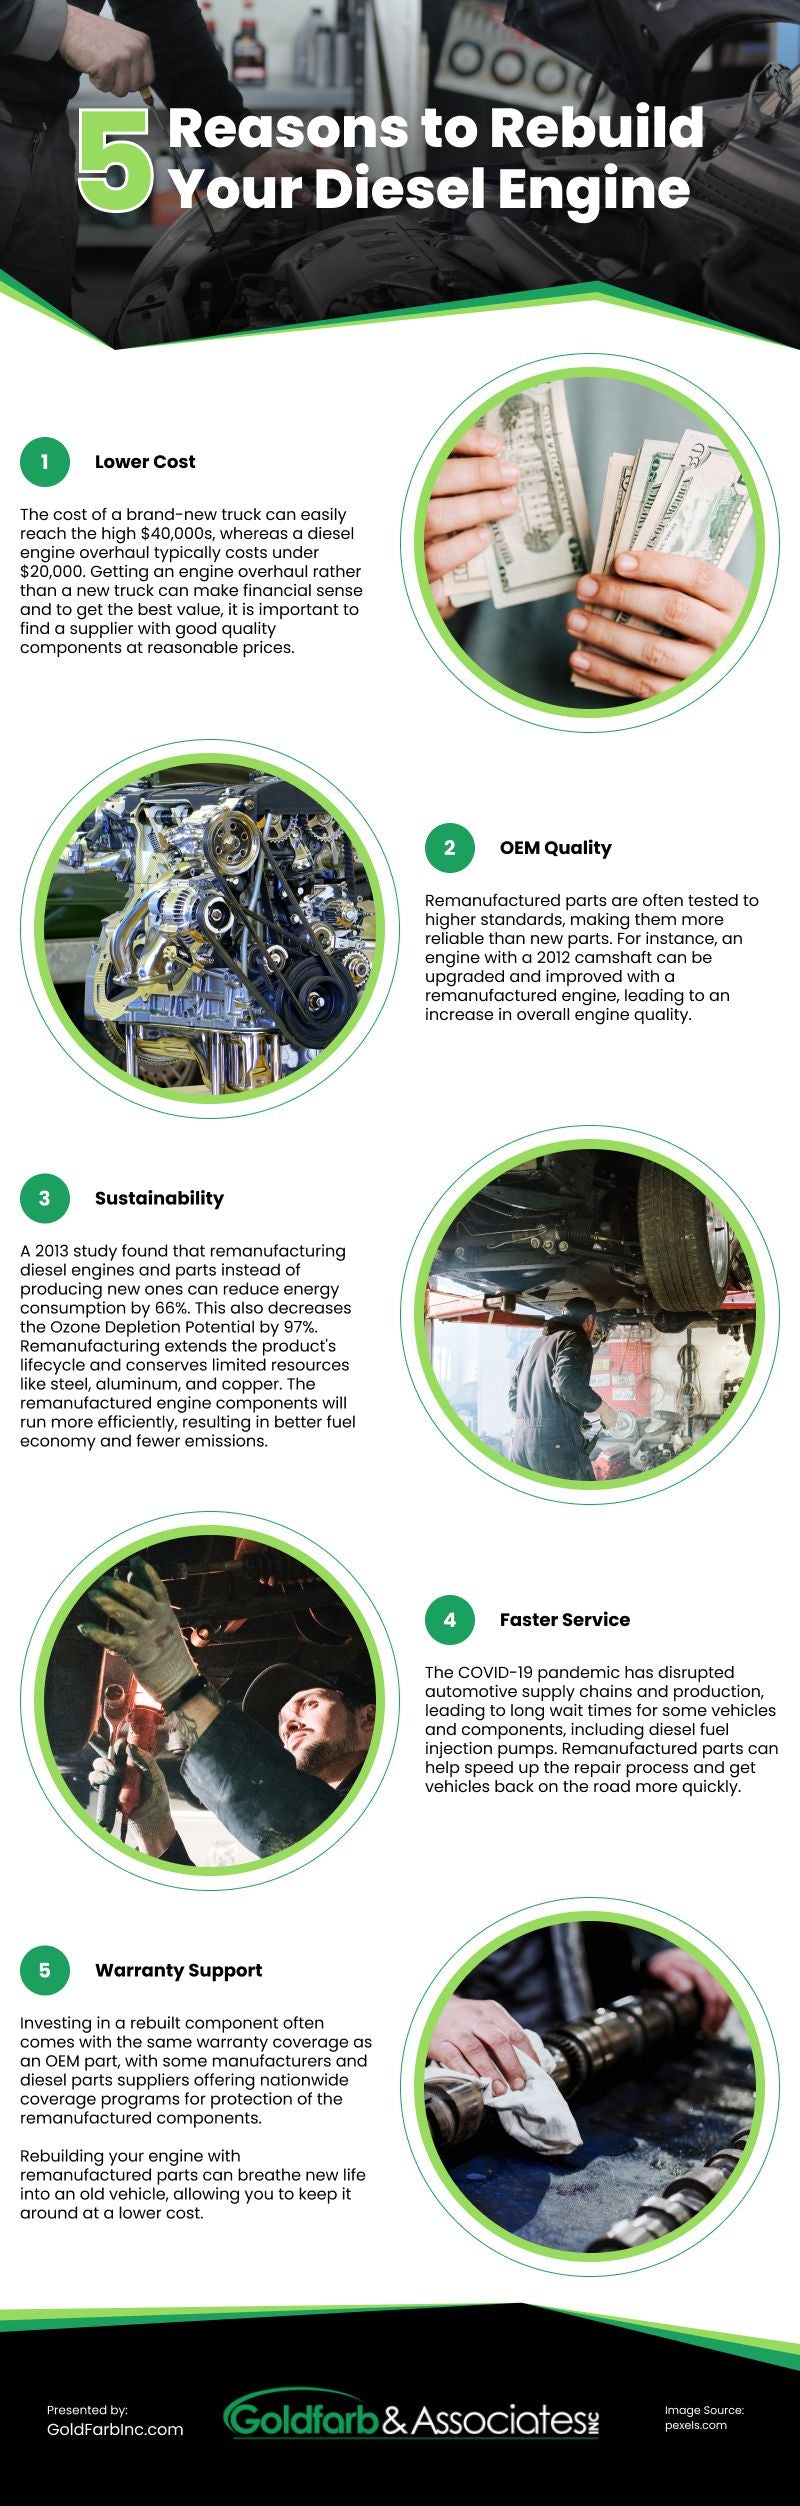 5 Reasons to Rebuild Your Diesel Engine Infographic